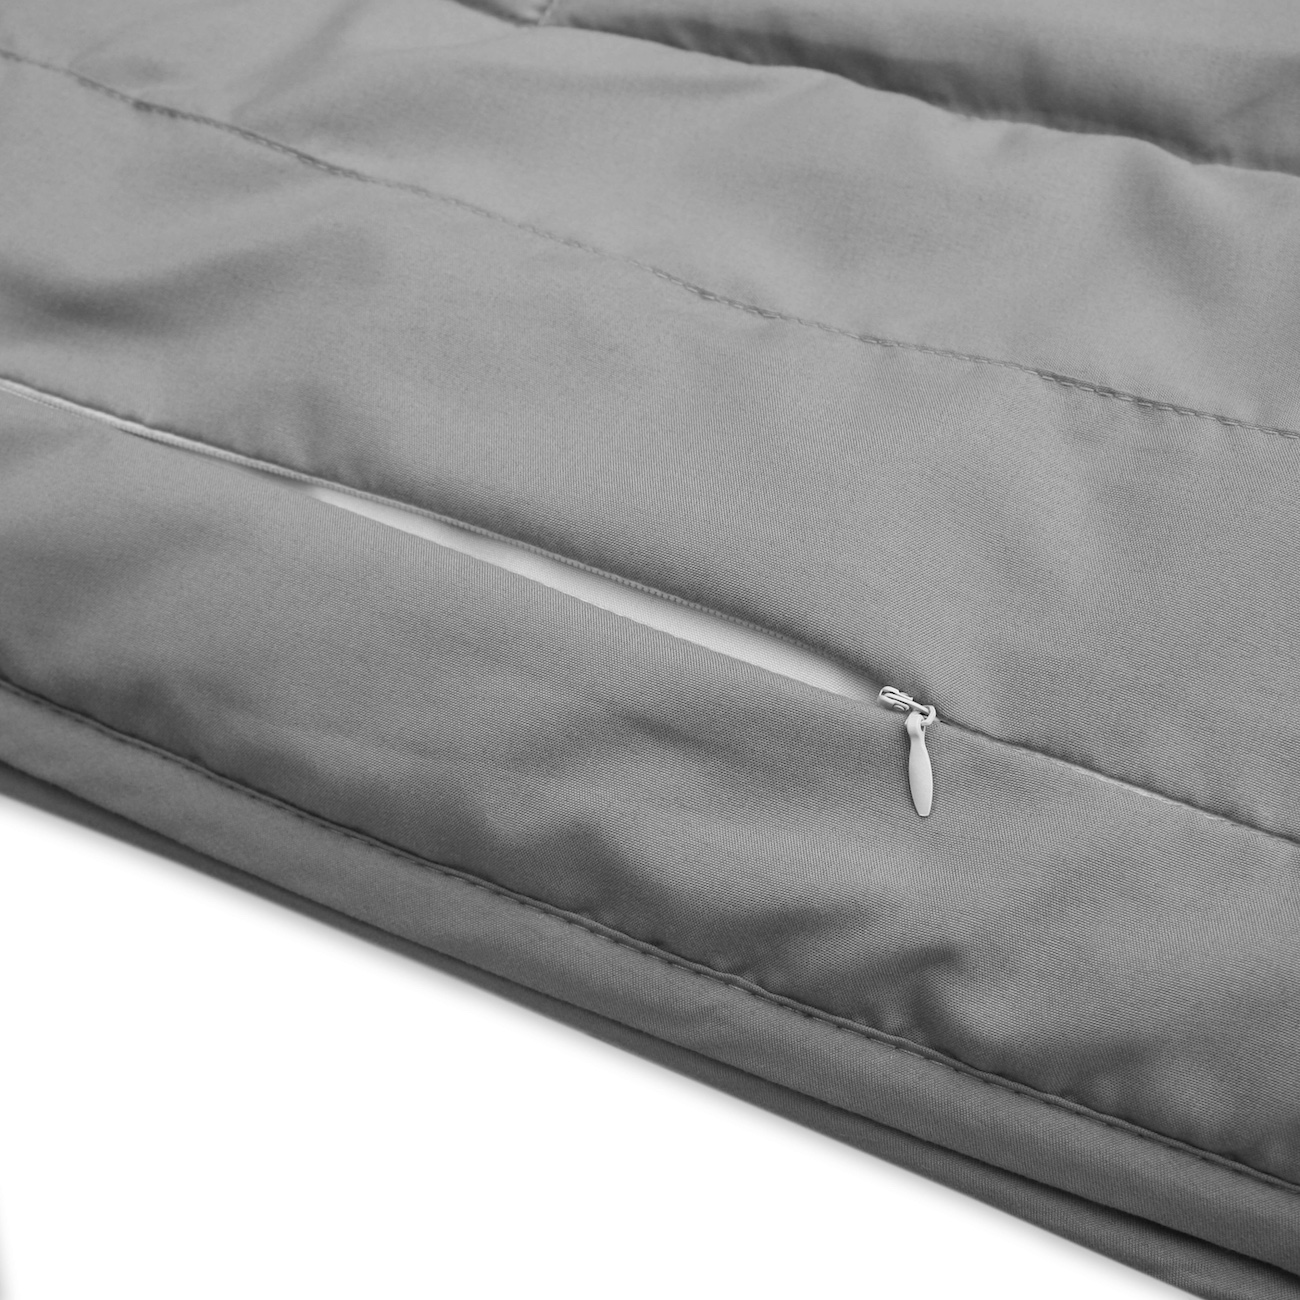 Walra Travel Bed-In-Bag 240X200